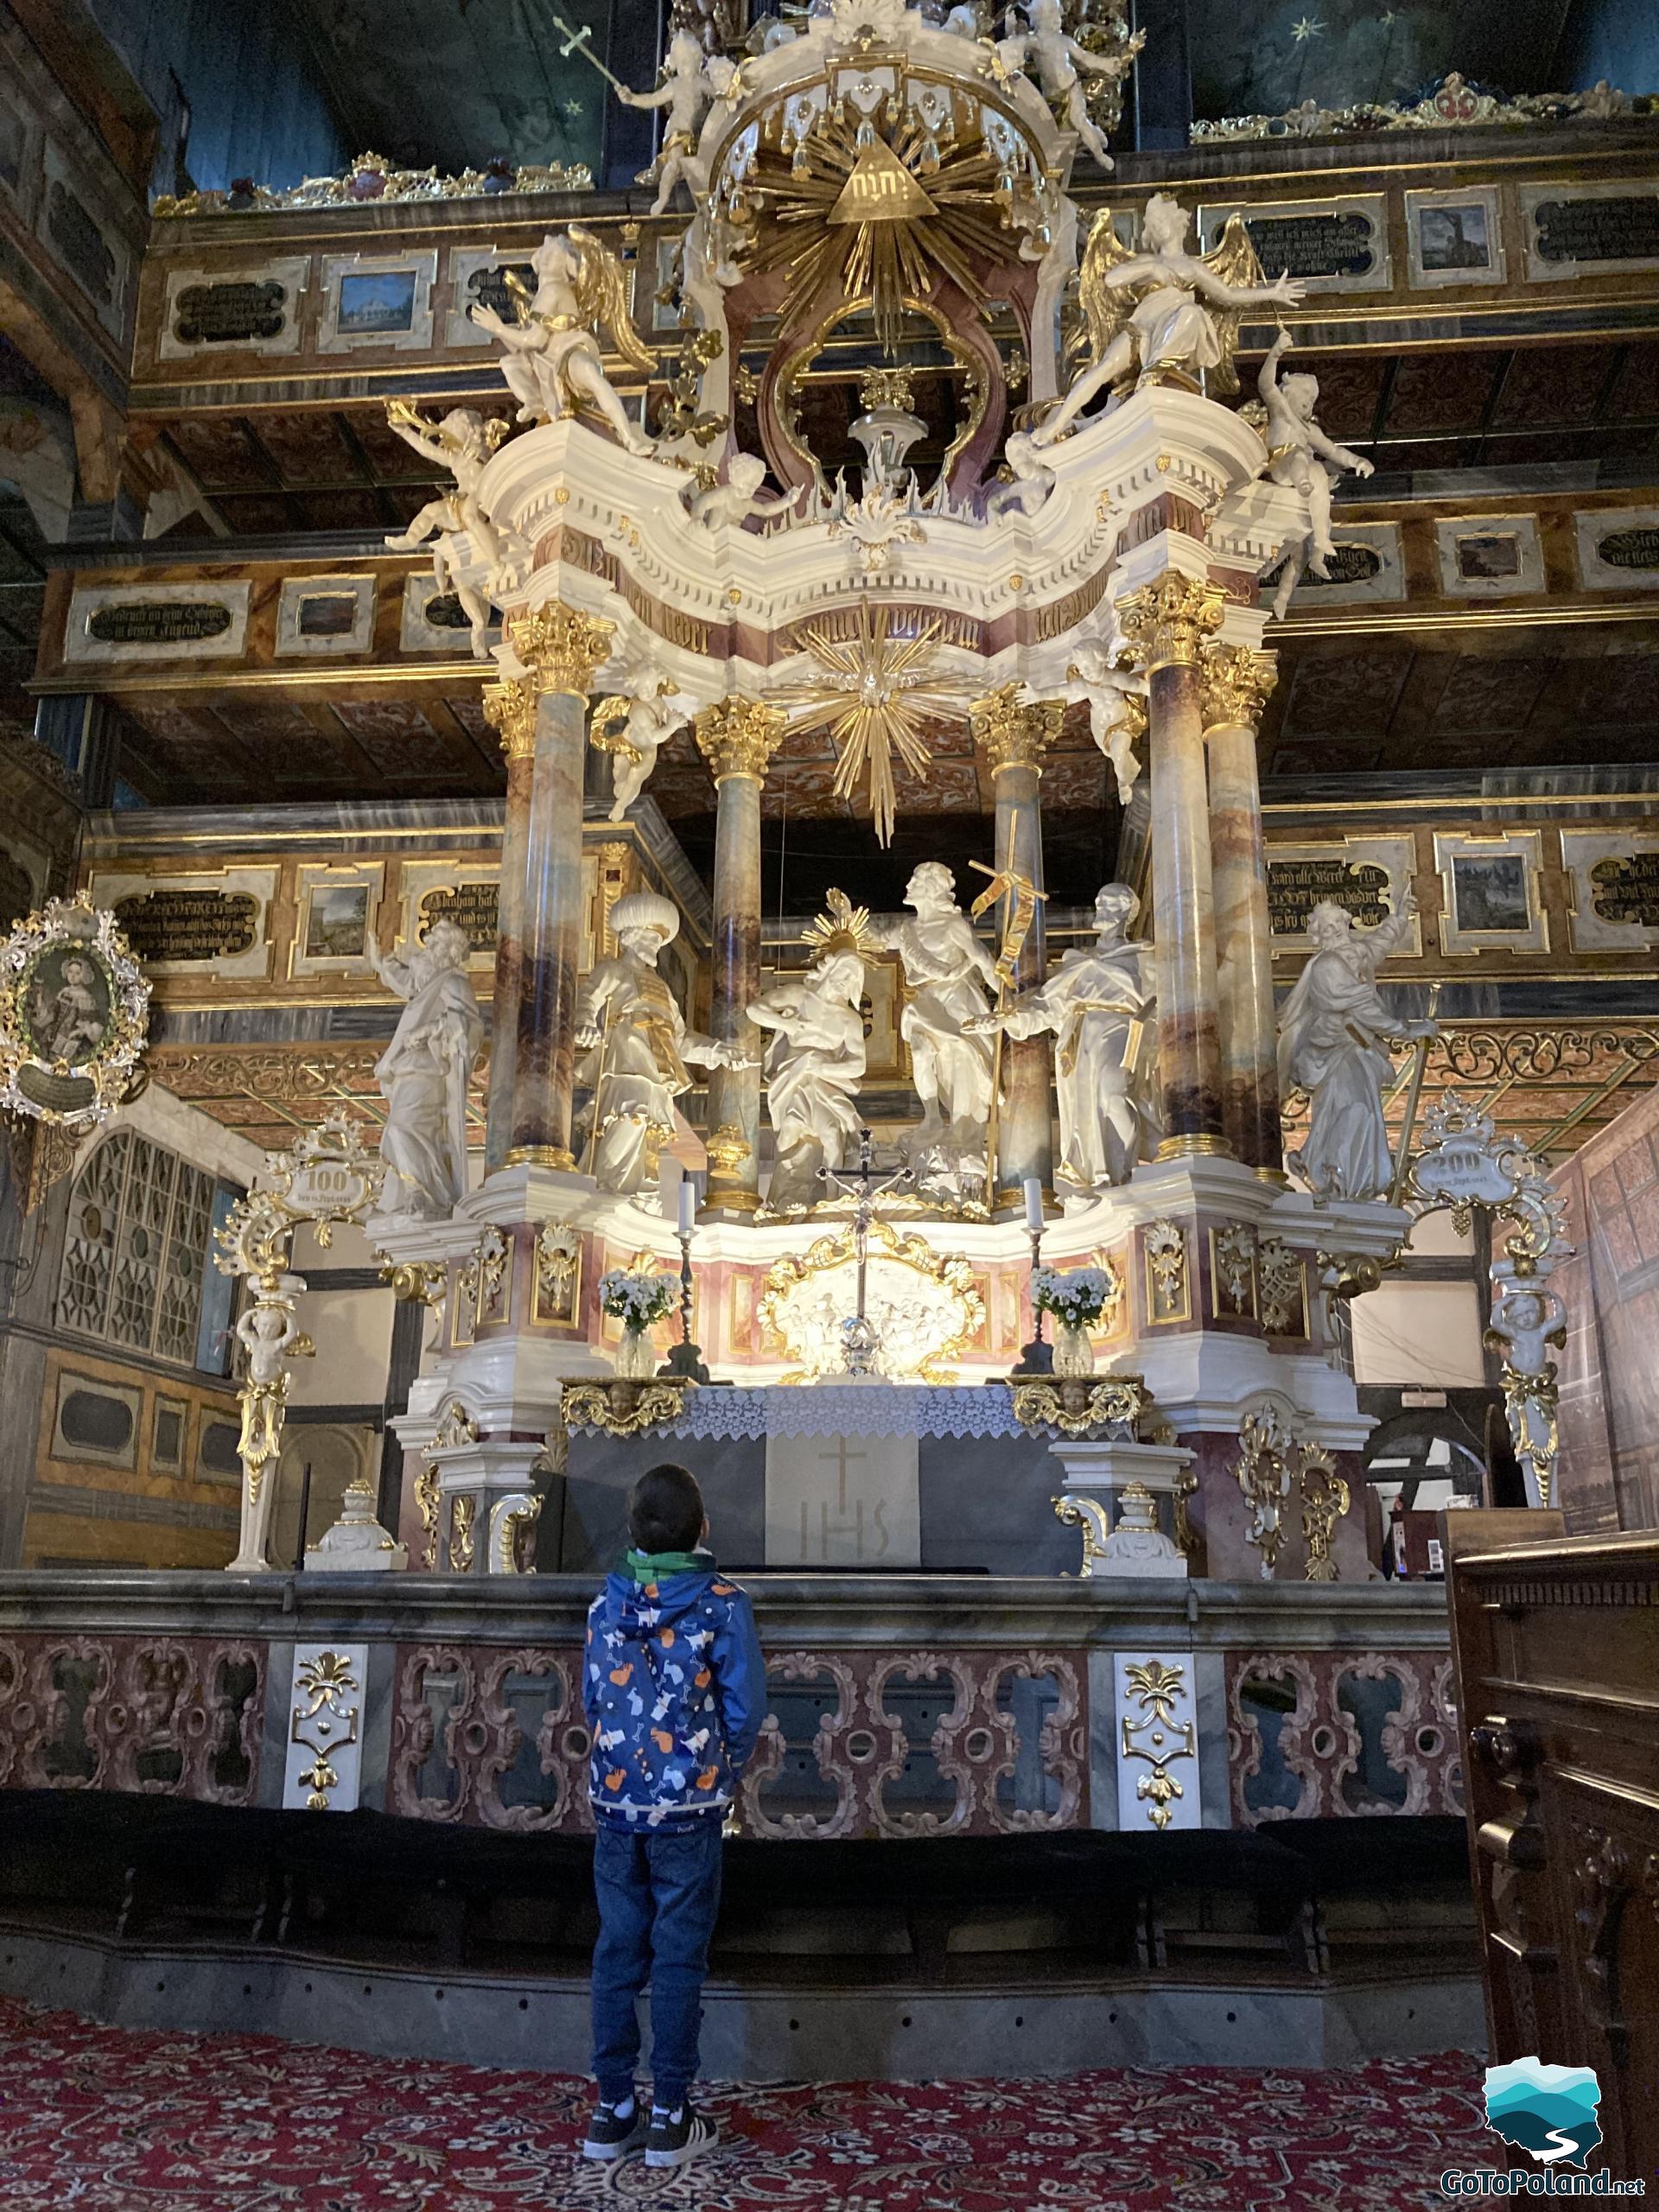 a boy standing in front a large altar